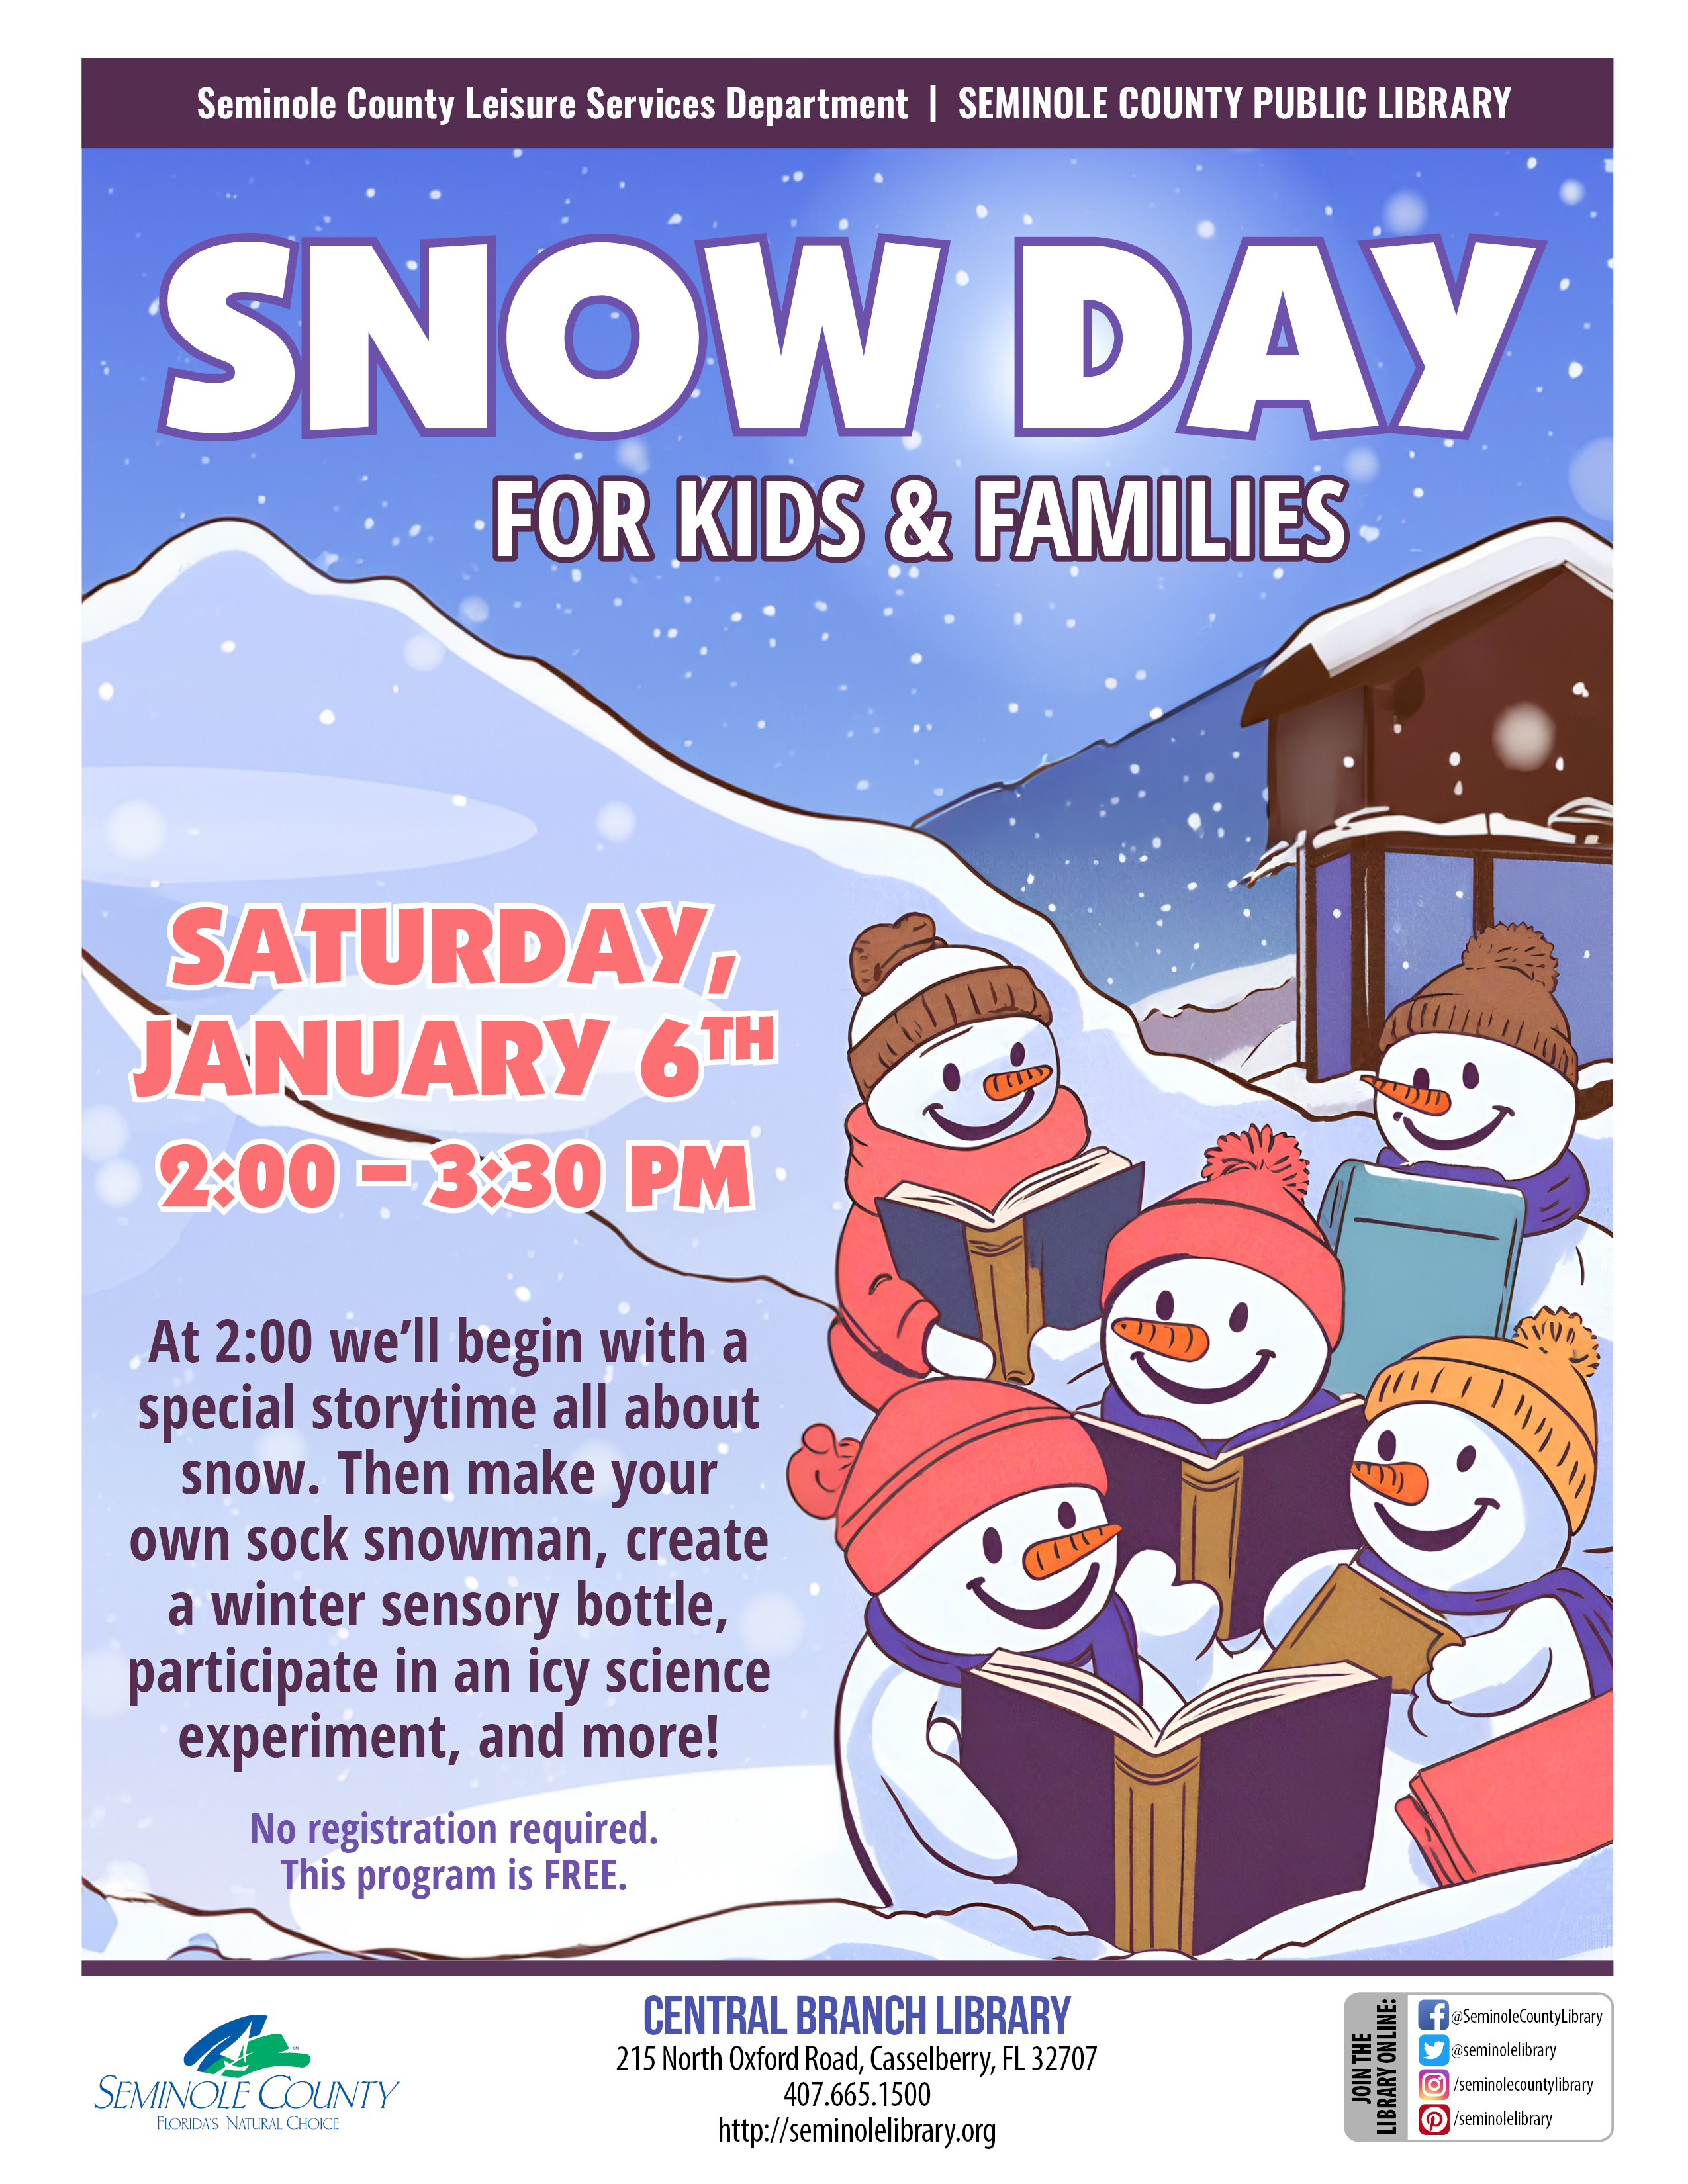 Snow Day - Central Branch Library